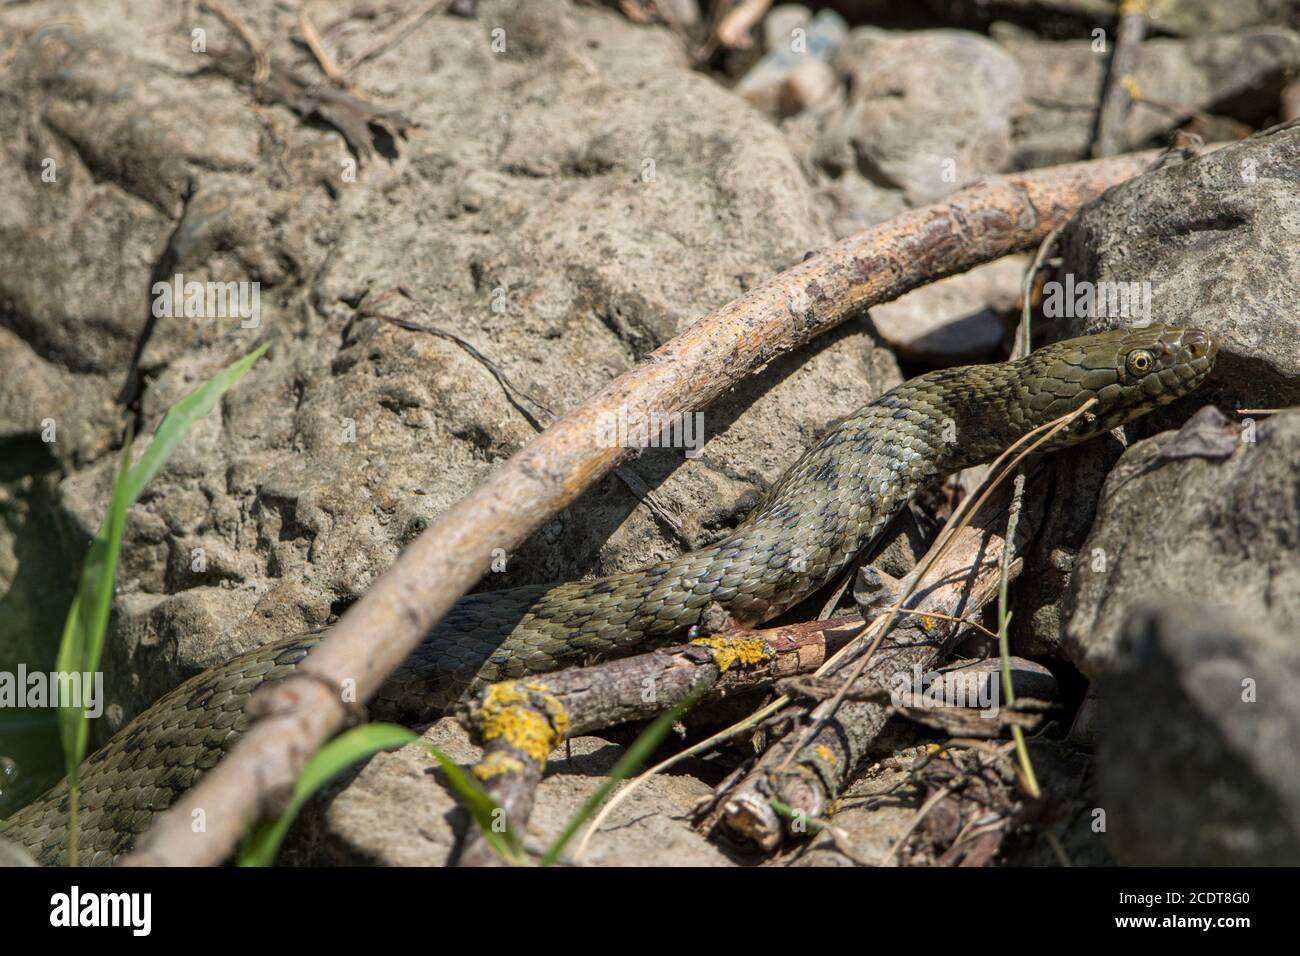 Close up of a hunting dice snake Stock Photo